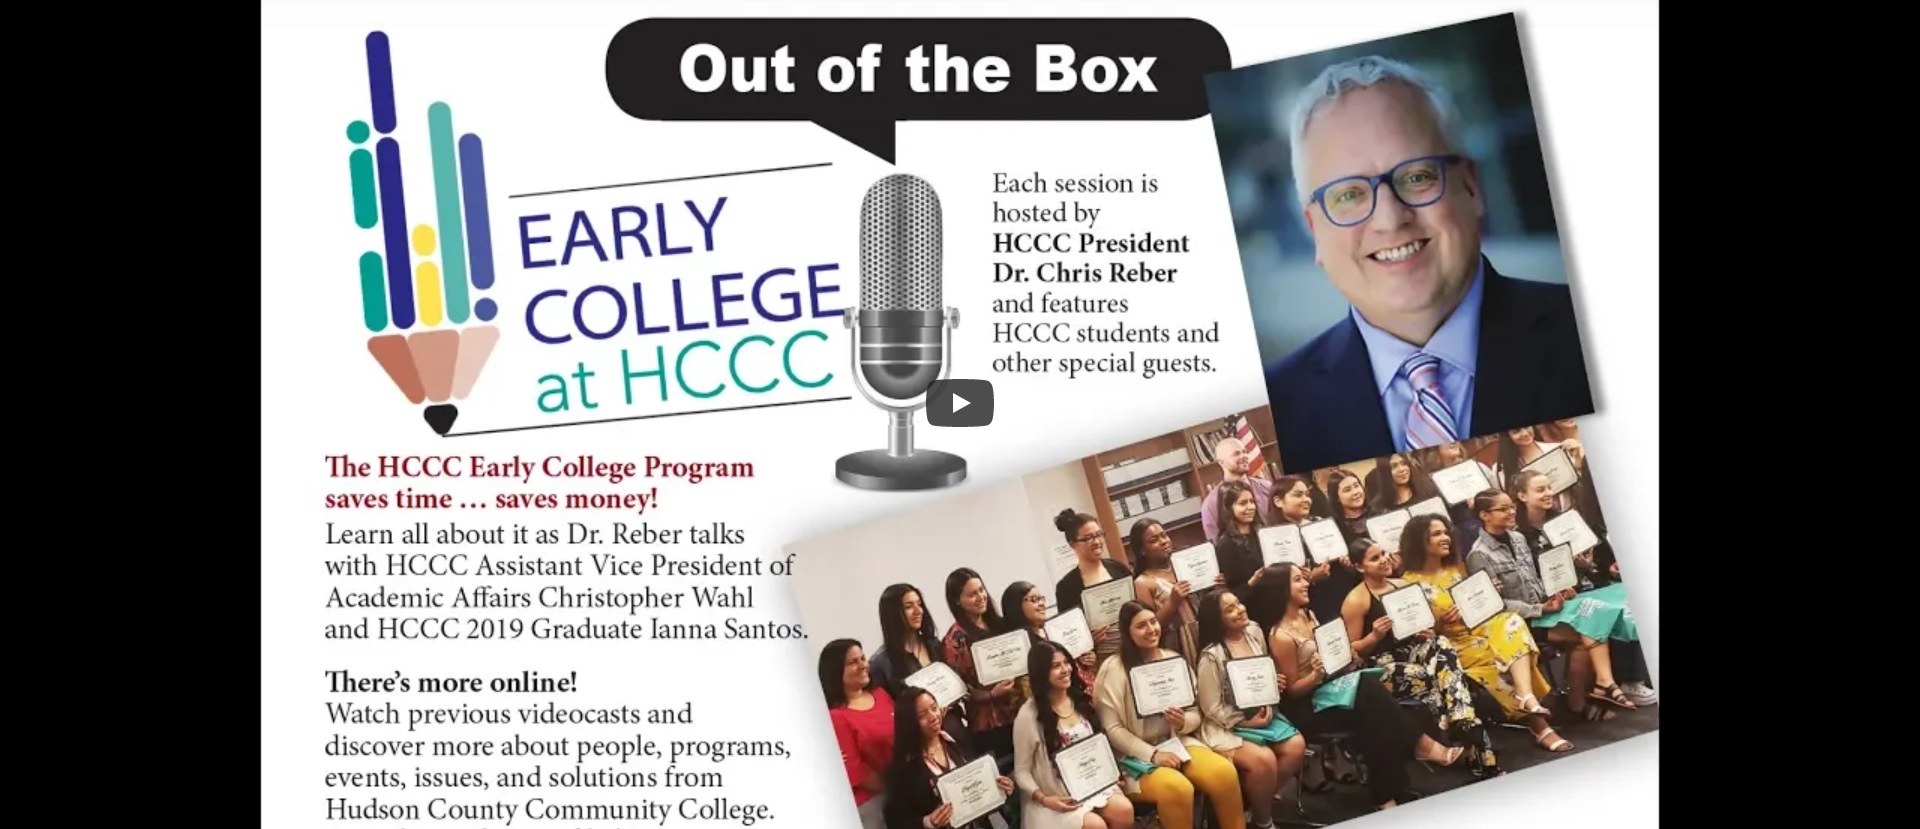 The HCCC Early College Program